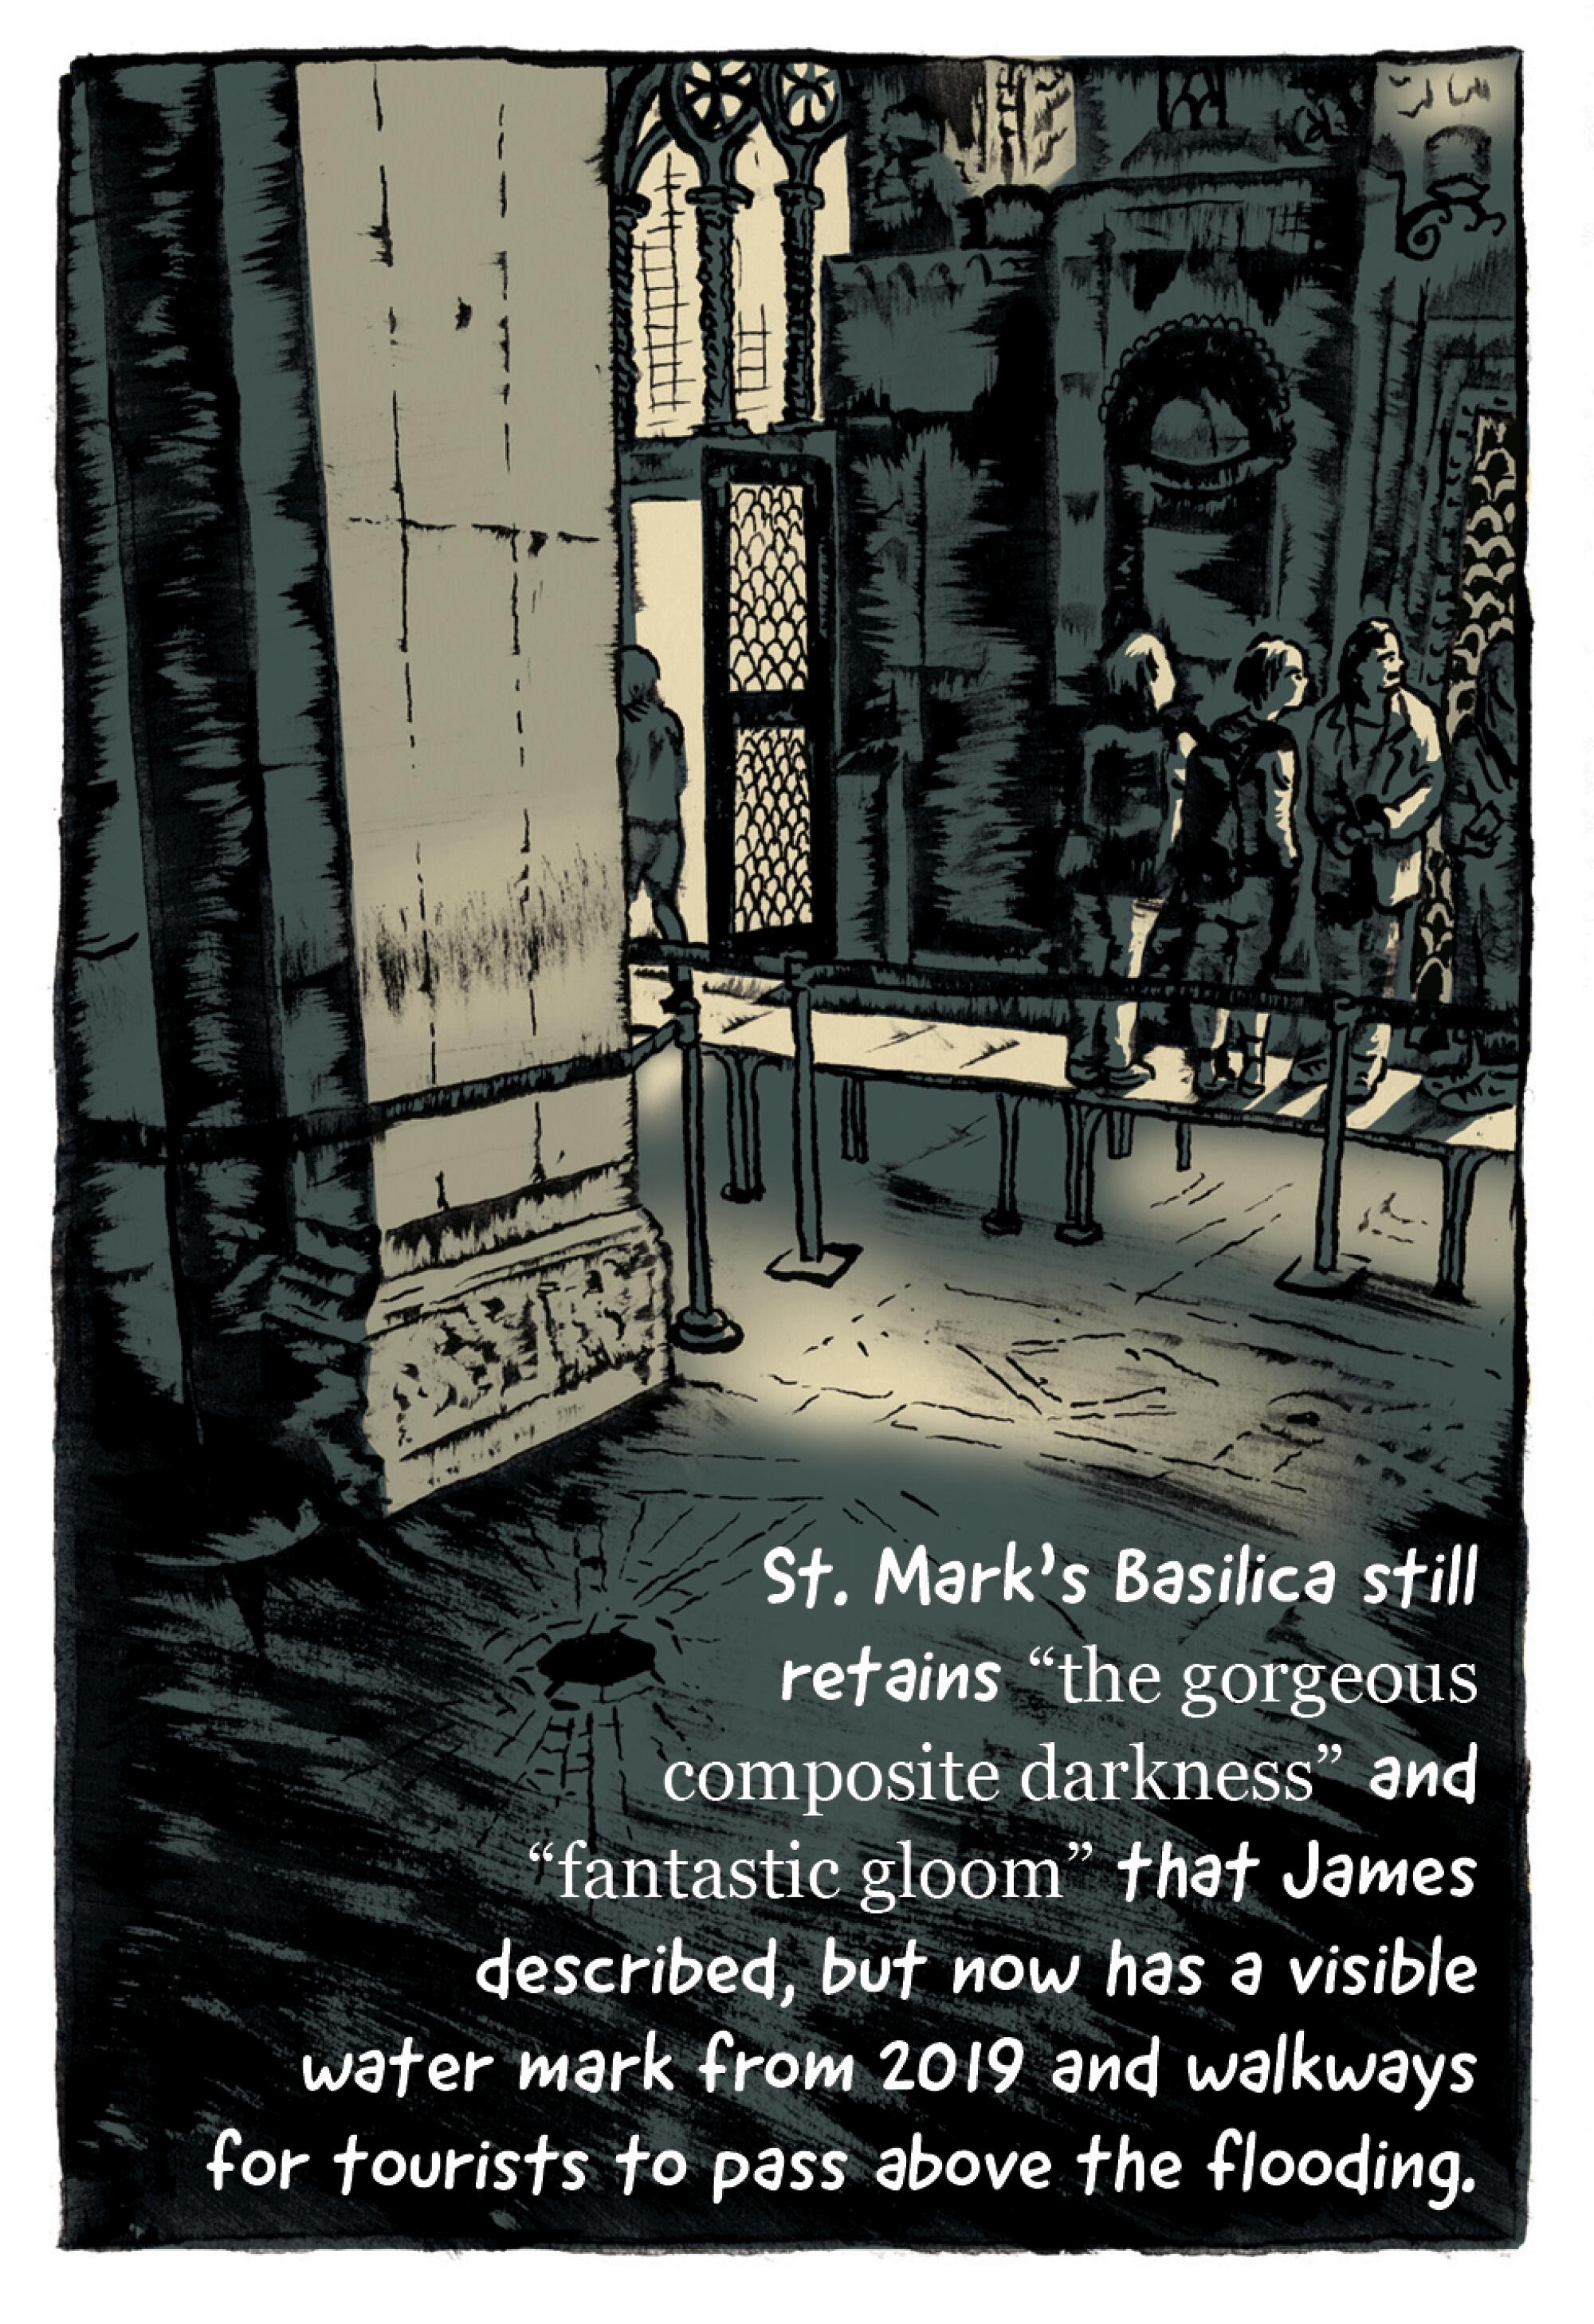 St. Mark's Basilica still retains the "fantastic gloom" that James described, but now has a visible water mark from 2019.